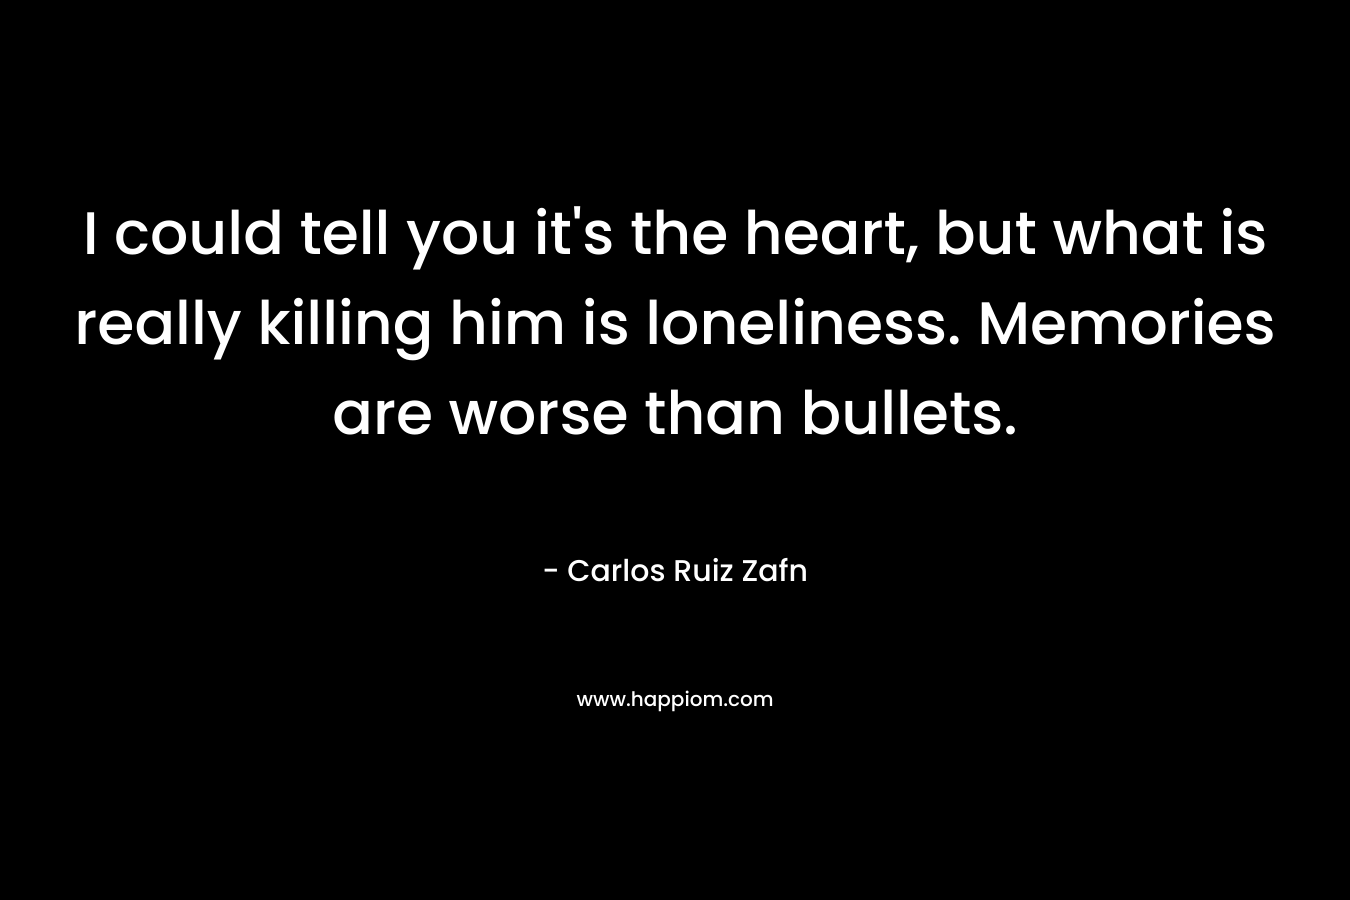 I could tell you it's the heart, but what is really killing him is loneliness. Memories are worse than bullets.